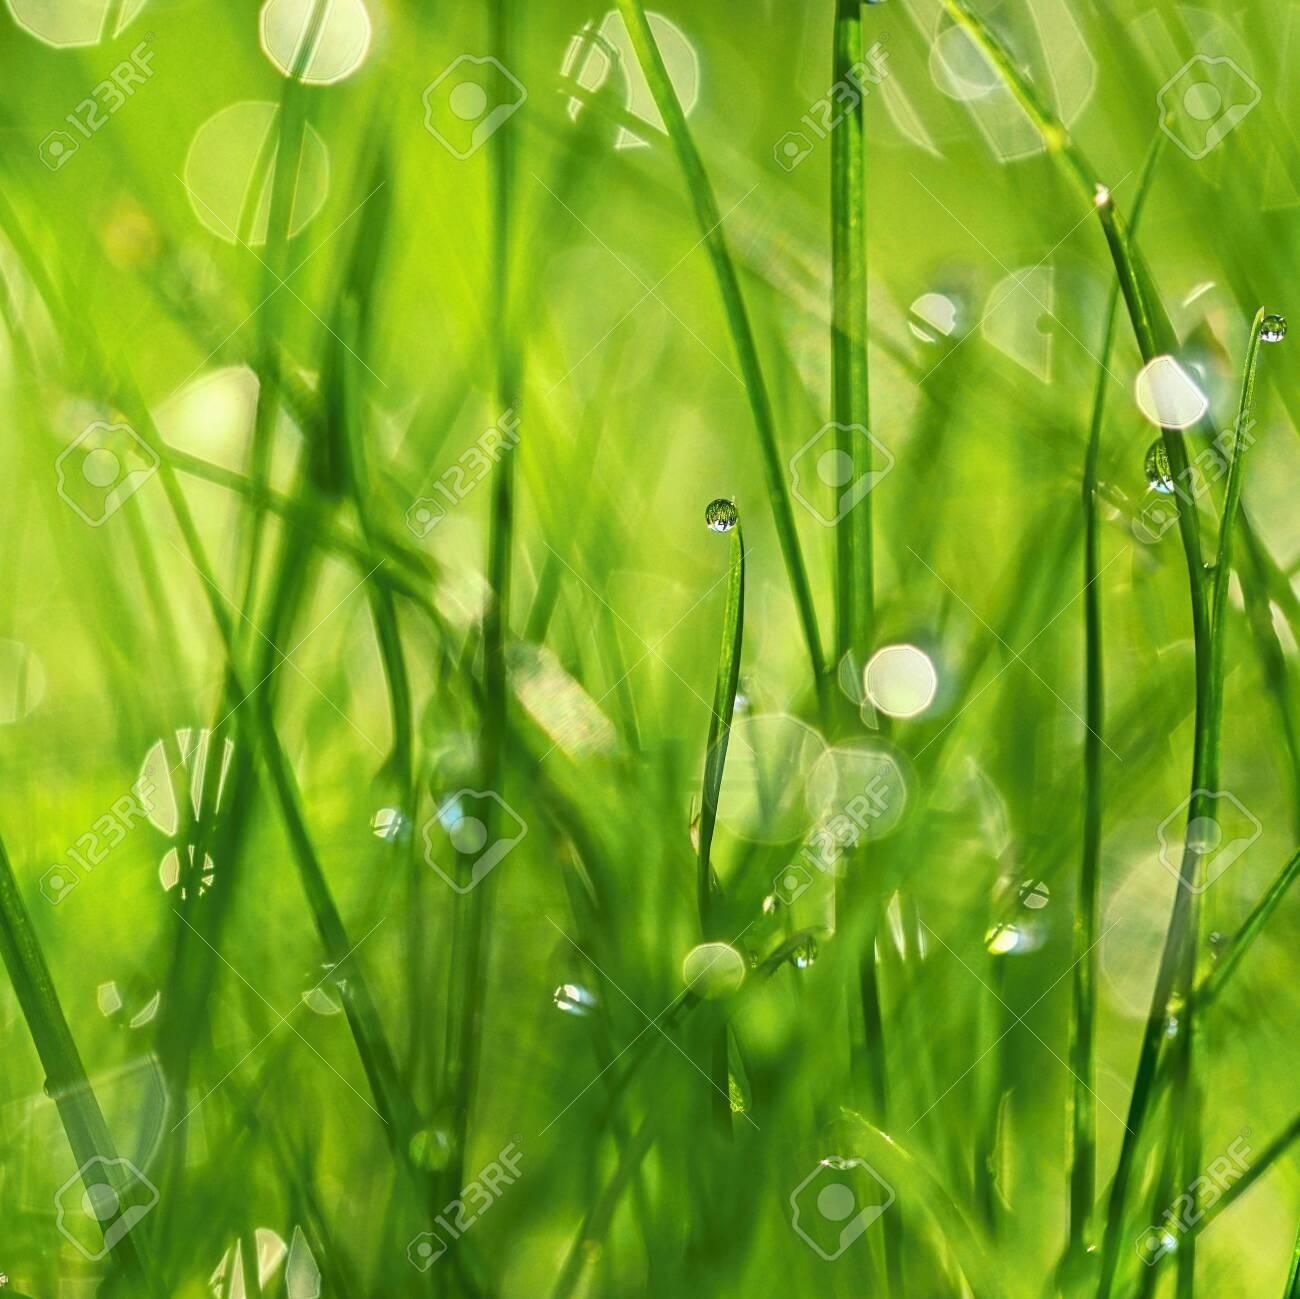 Green Nature Beautiful Close Up Photo Of Grass With